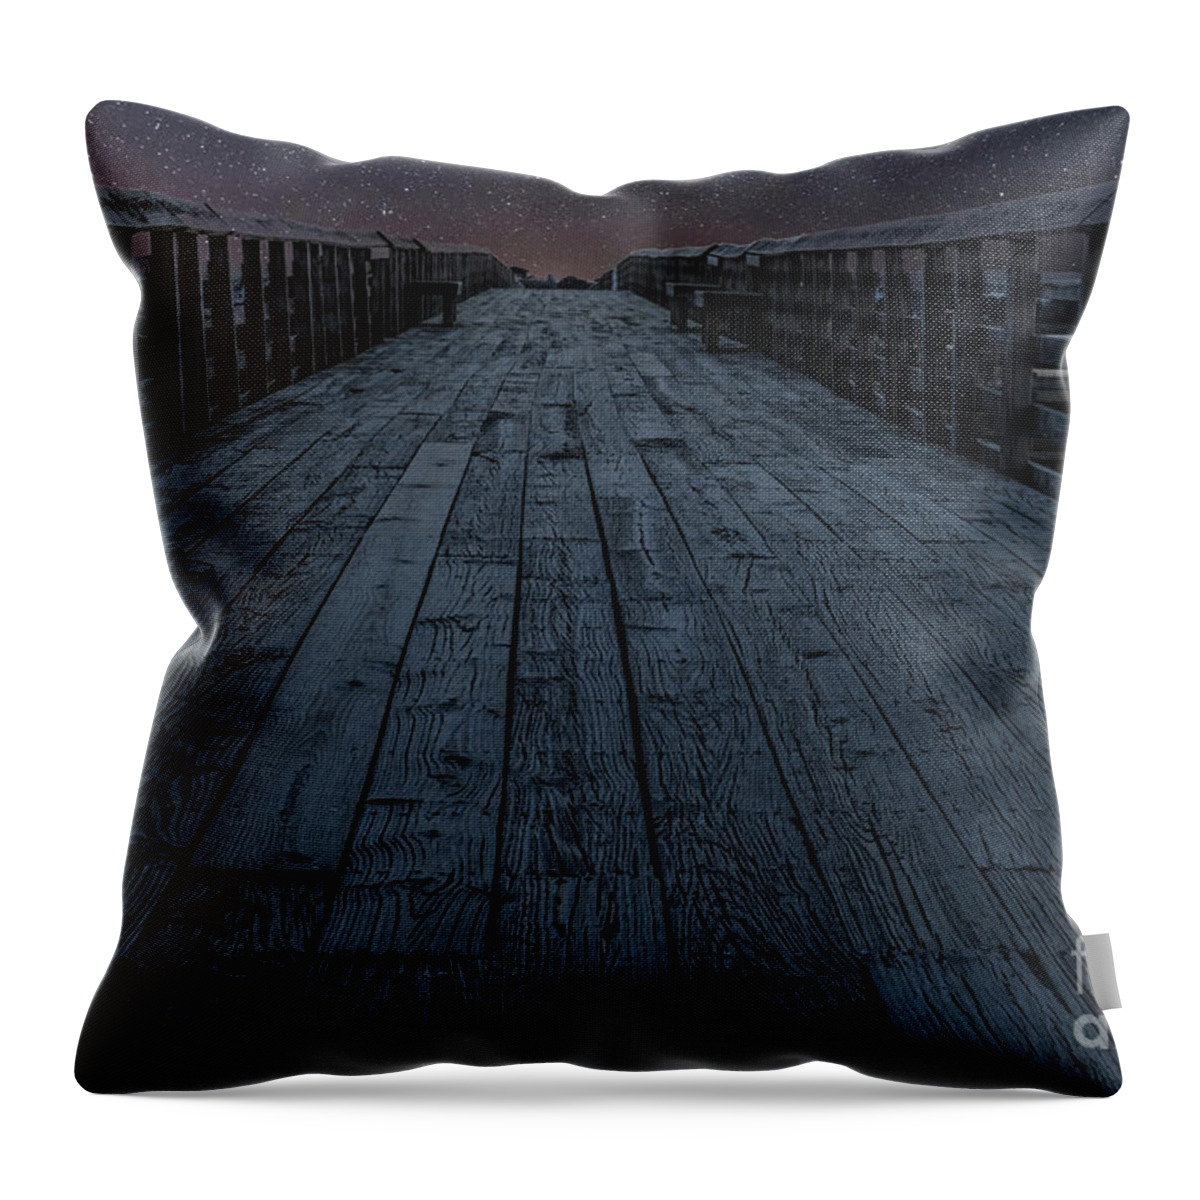 Starry Night Throw Pillow featuring the photograph Starry Night by Dale Powell